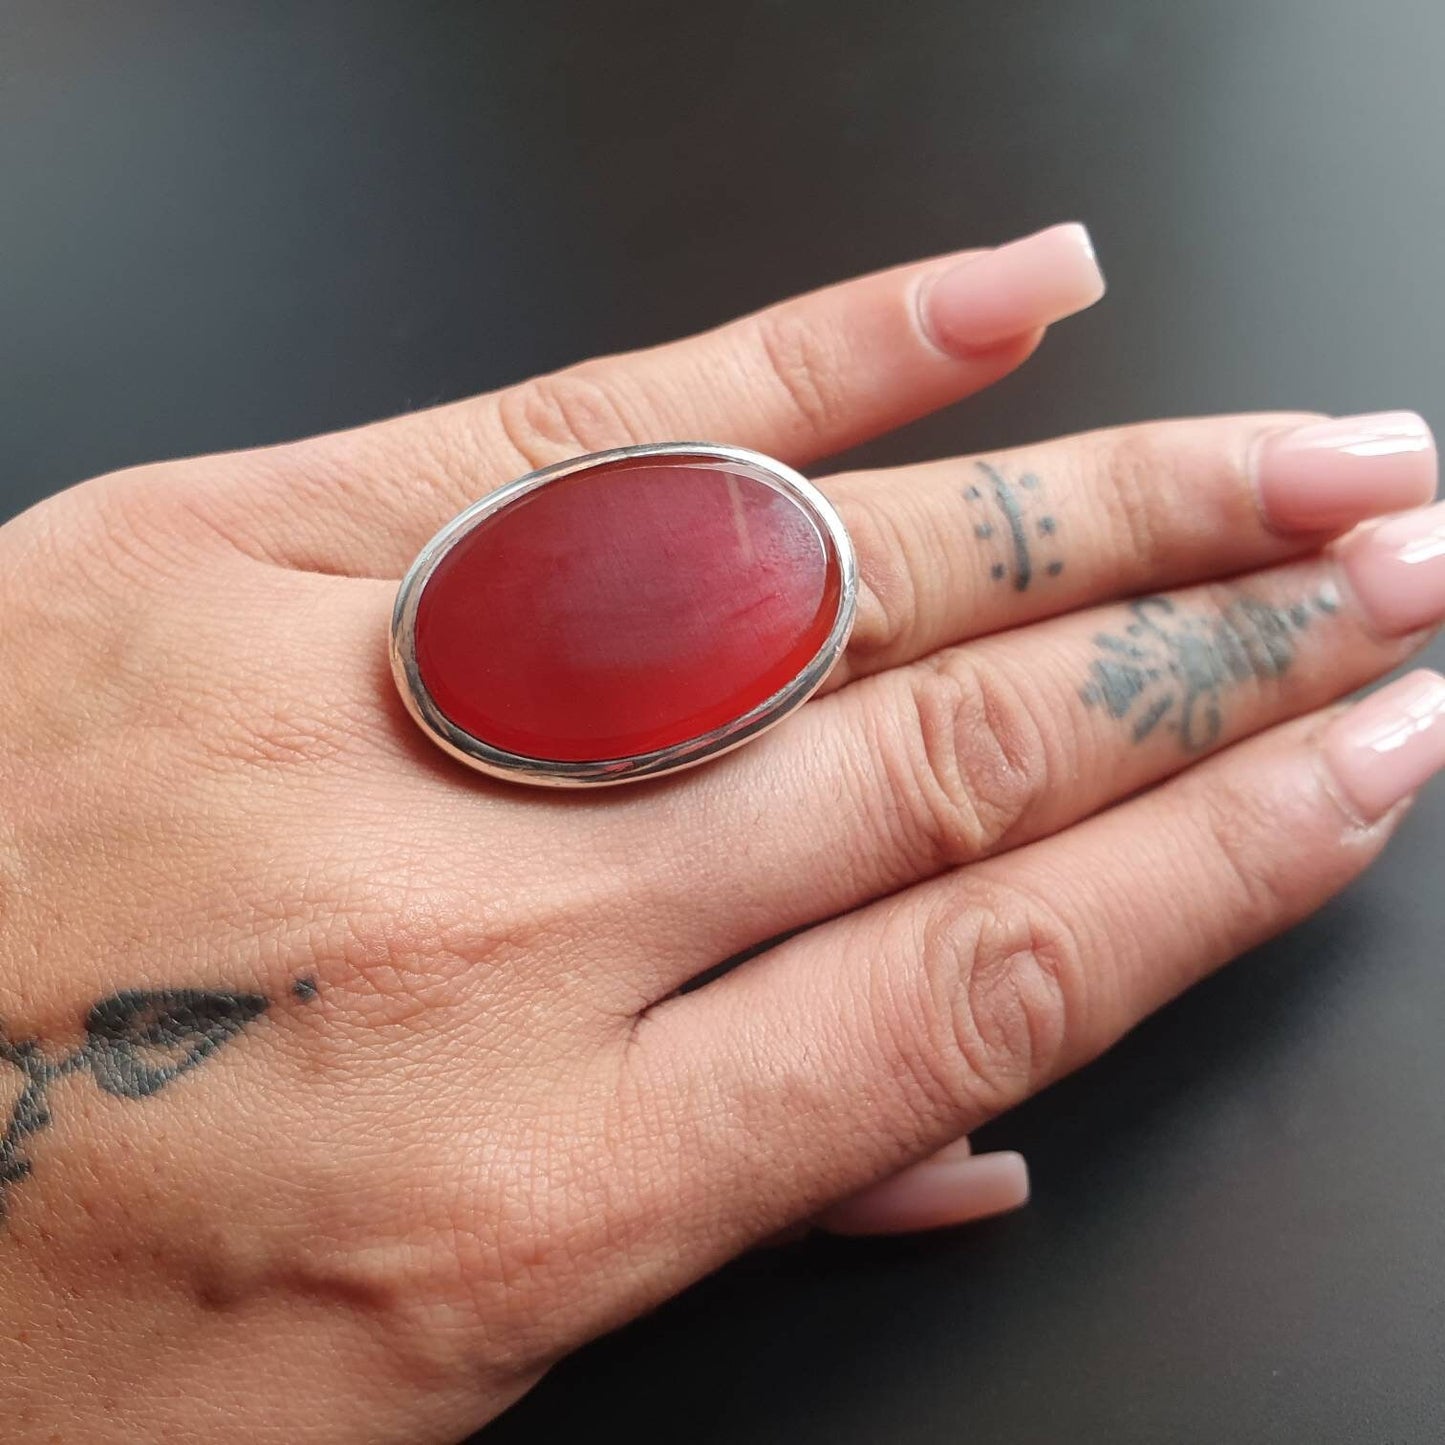 Statement ring, sterling silver ring, carnelian ring, carnelian gemstone, gift, chunky, oversized, silver, unisex, jewellery, costume